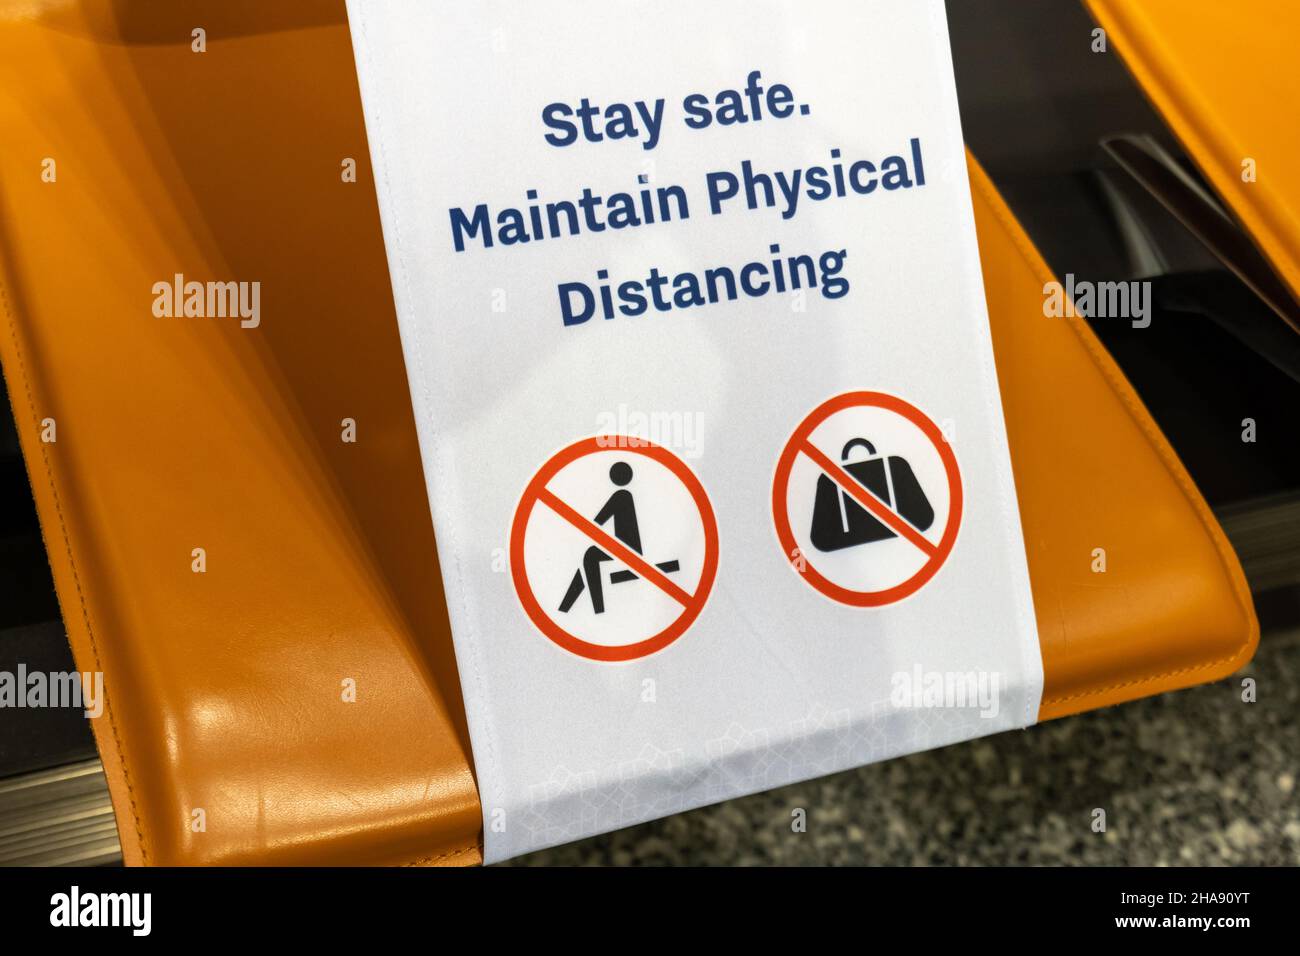 social distancing warning sign in airport due to COVID 19 coronavirus pandemic. Stock Photo